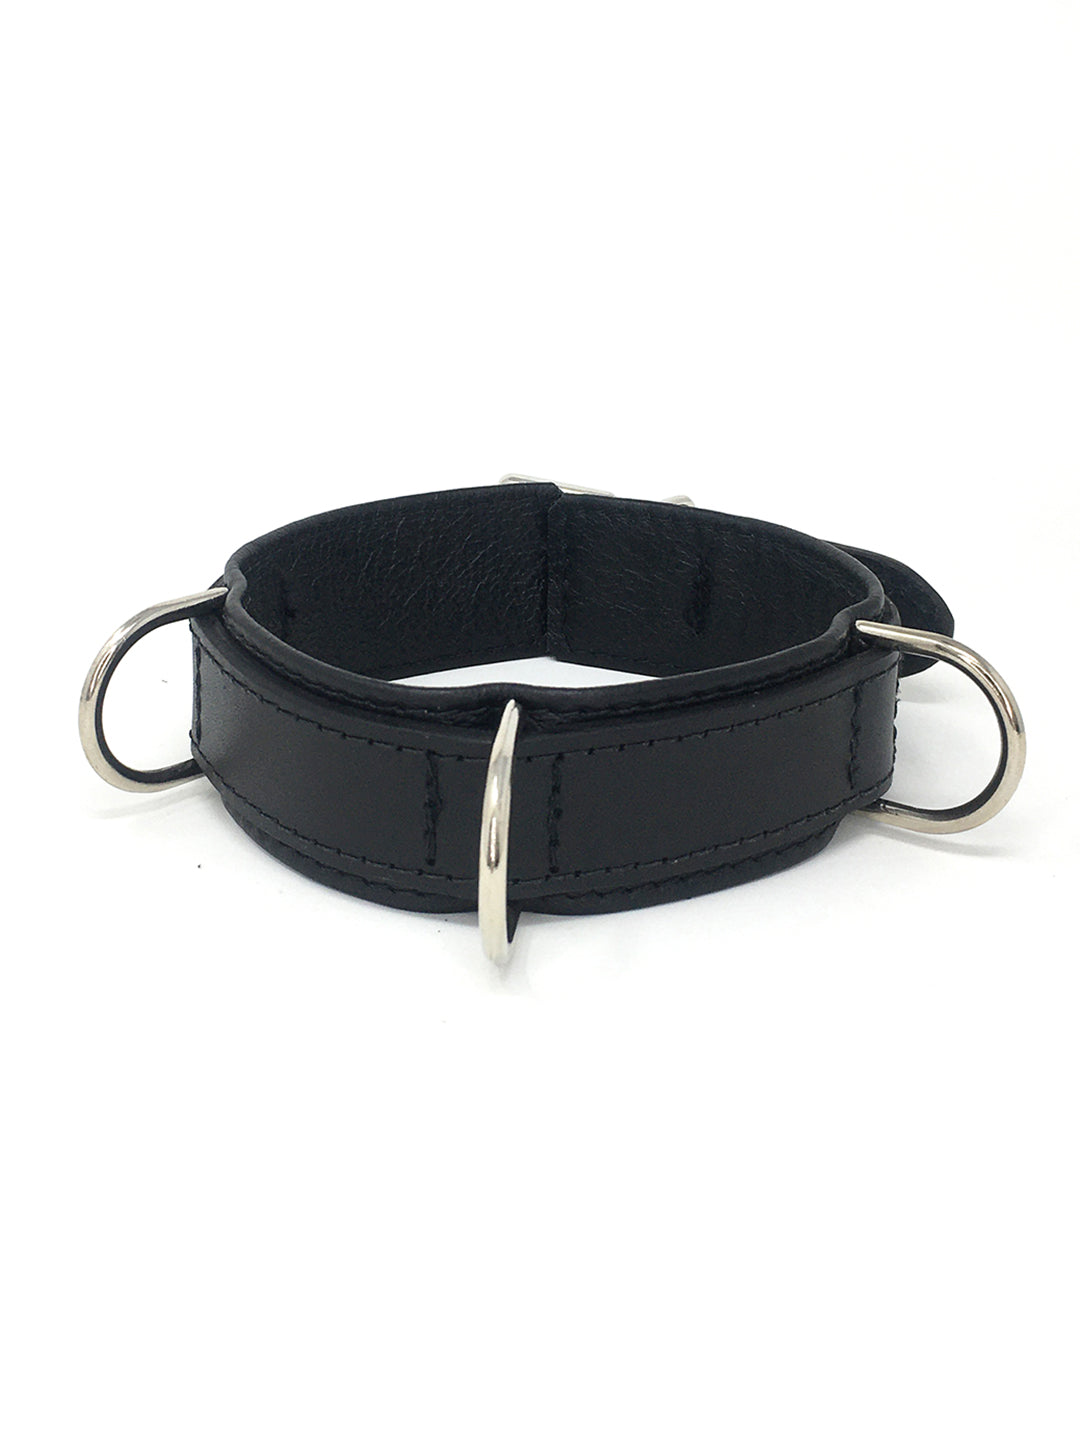 Leather Collar with 3 D-Rings